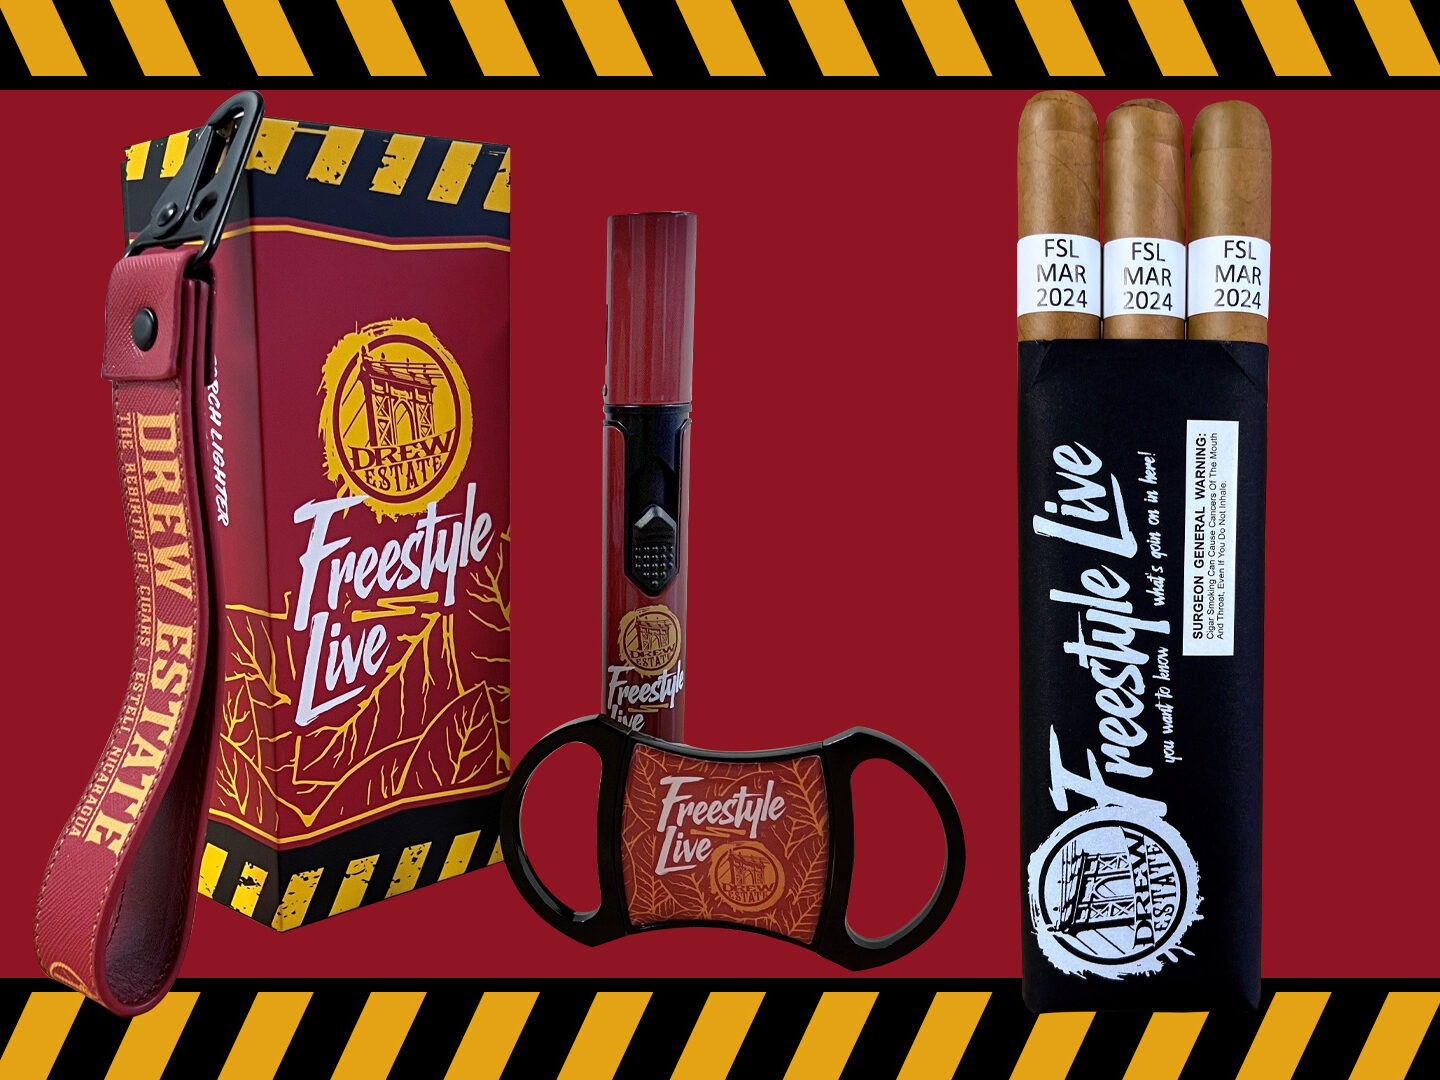 Drew Estate Launches Freestyle Live Event Pack with New Mystery Cigar